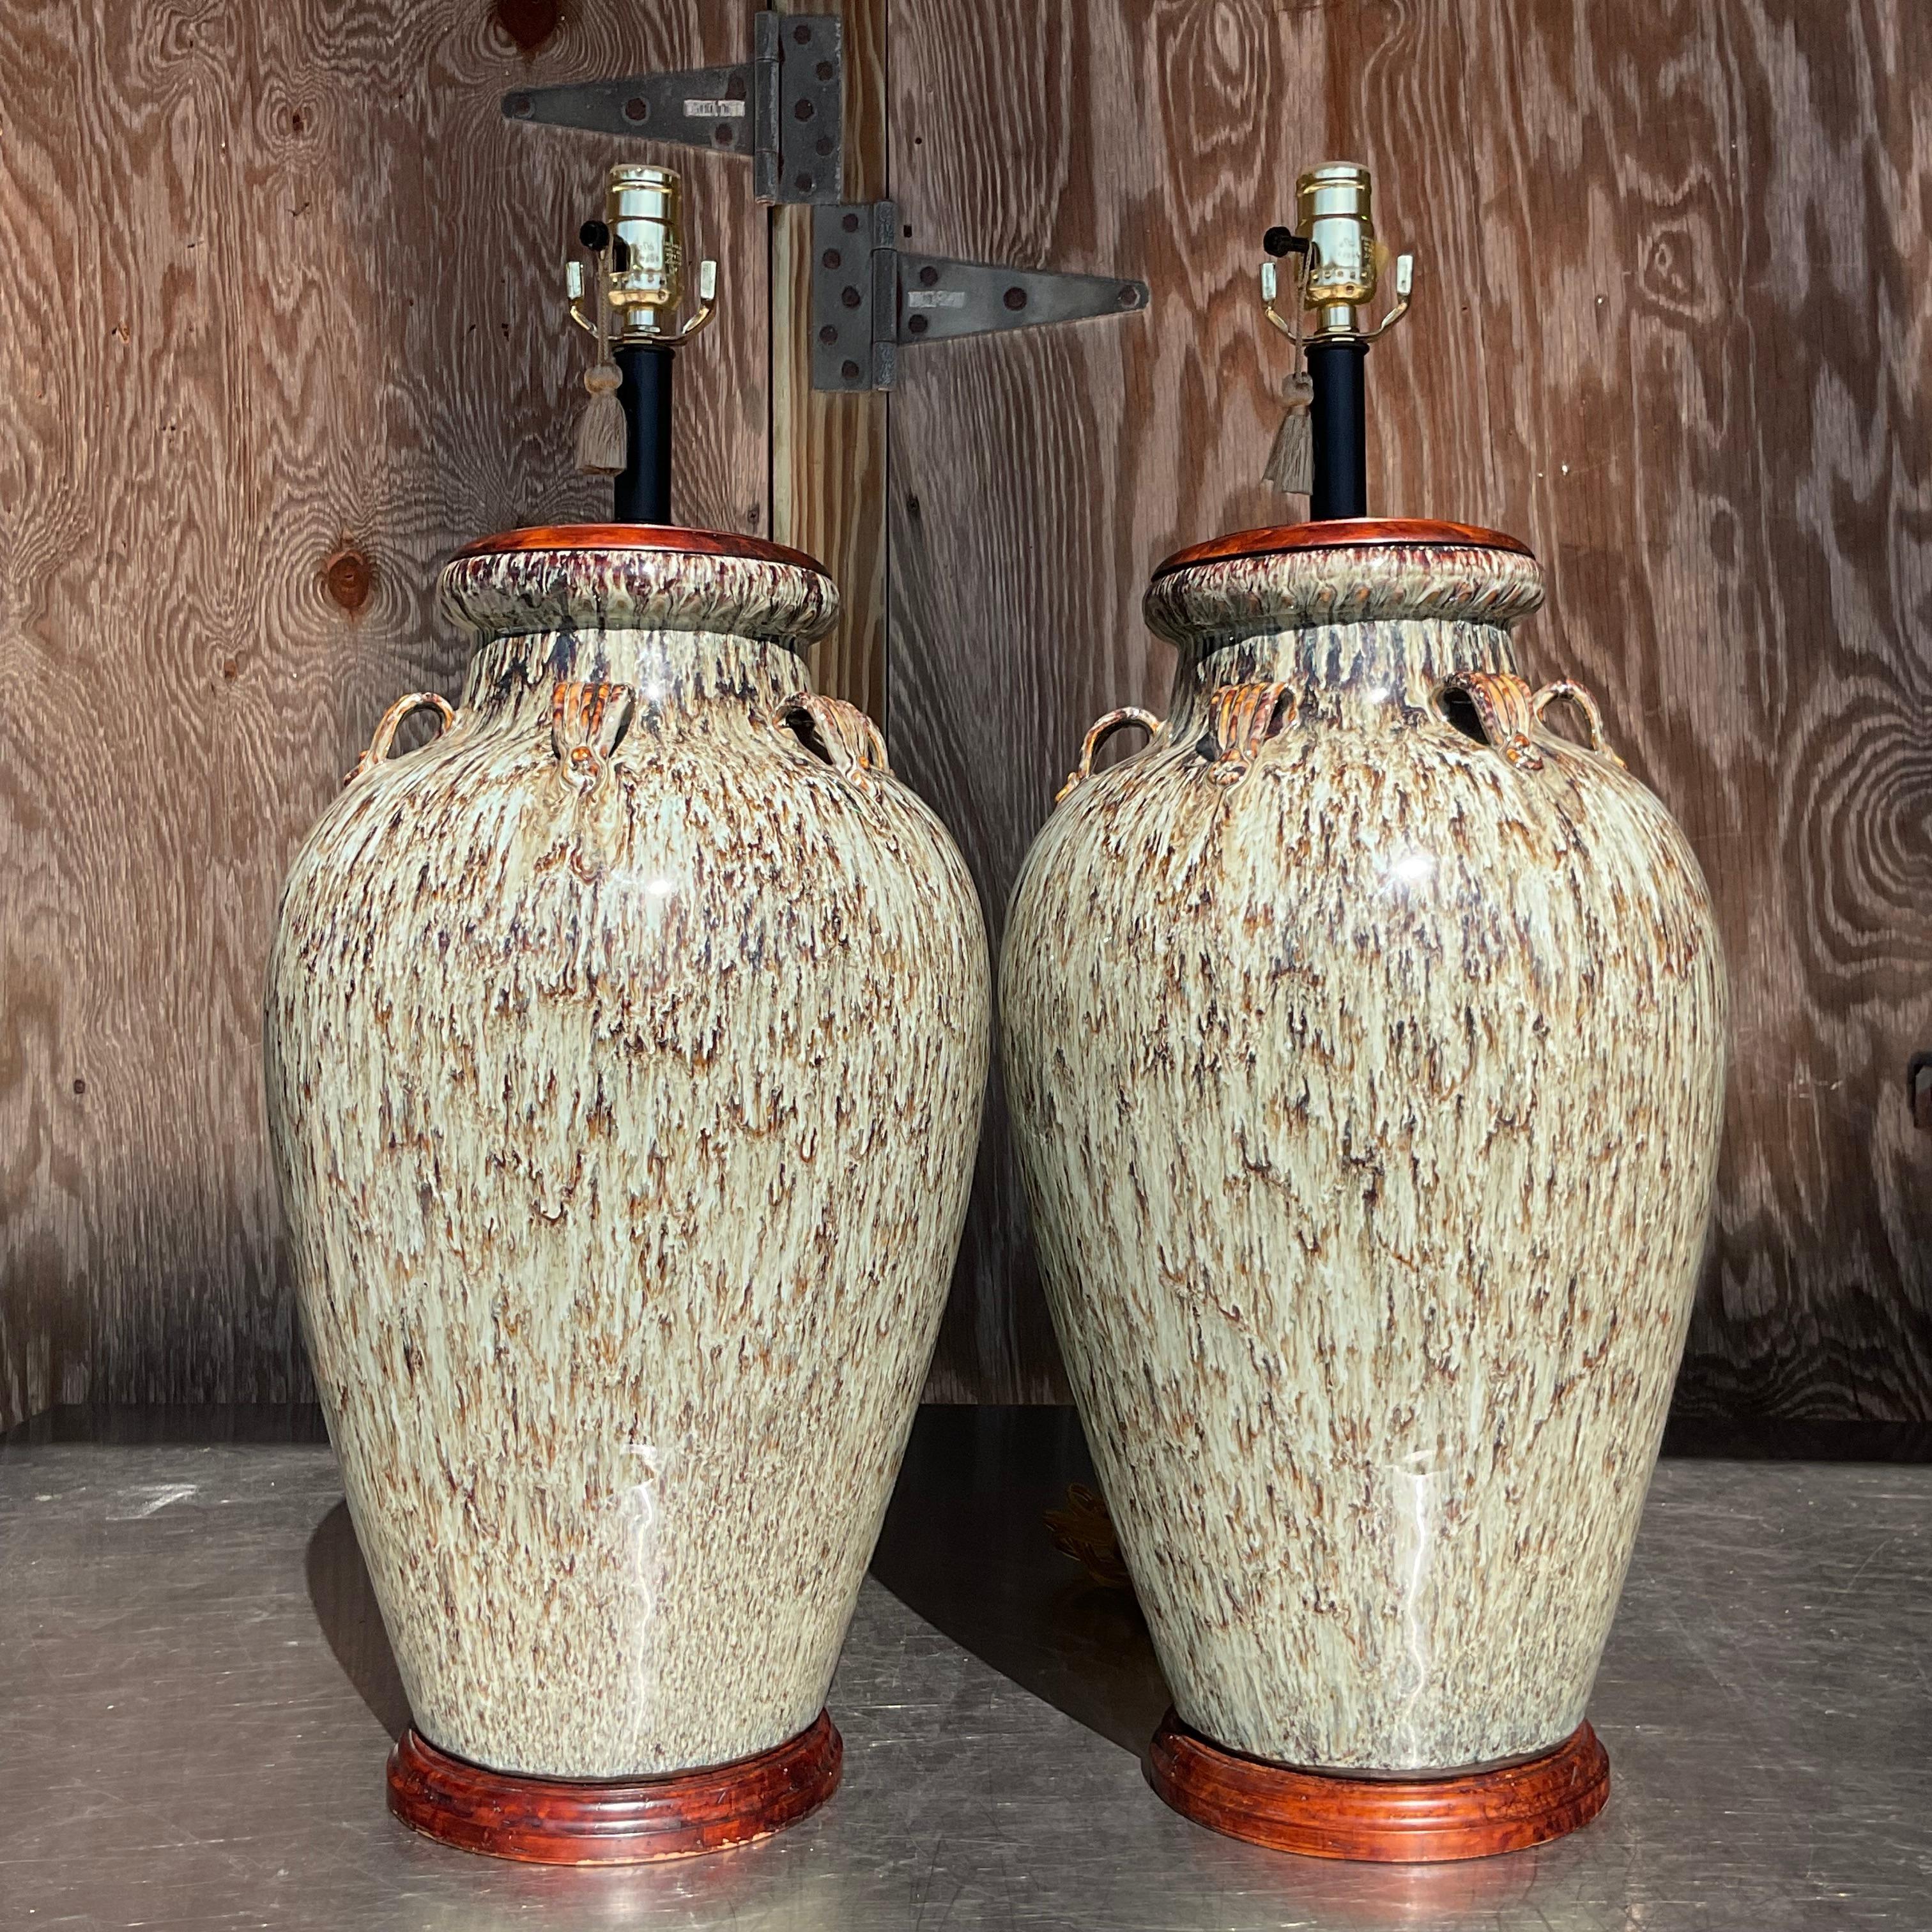 A fabulous pair of vintage Boho table lamps. A chic drip glass in shades of pale Celadon and brown. Rests on wooden plinths. Monumental in size and drama. Acquired from a Palm Beach estate.